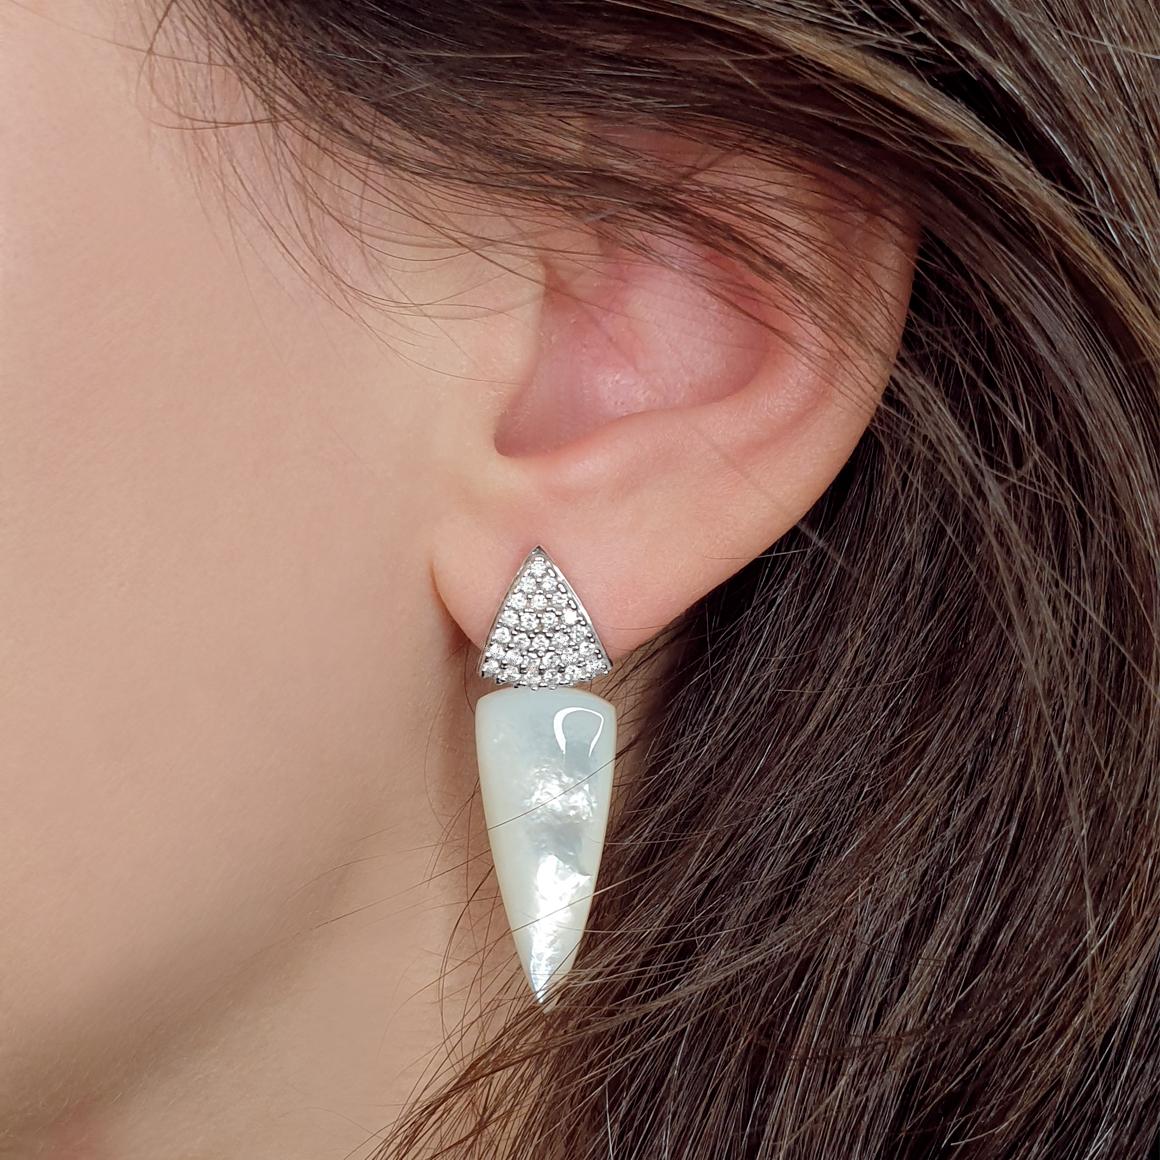 This earrings is part of the new collection 